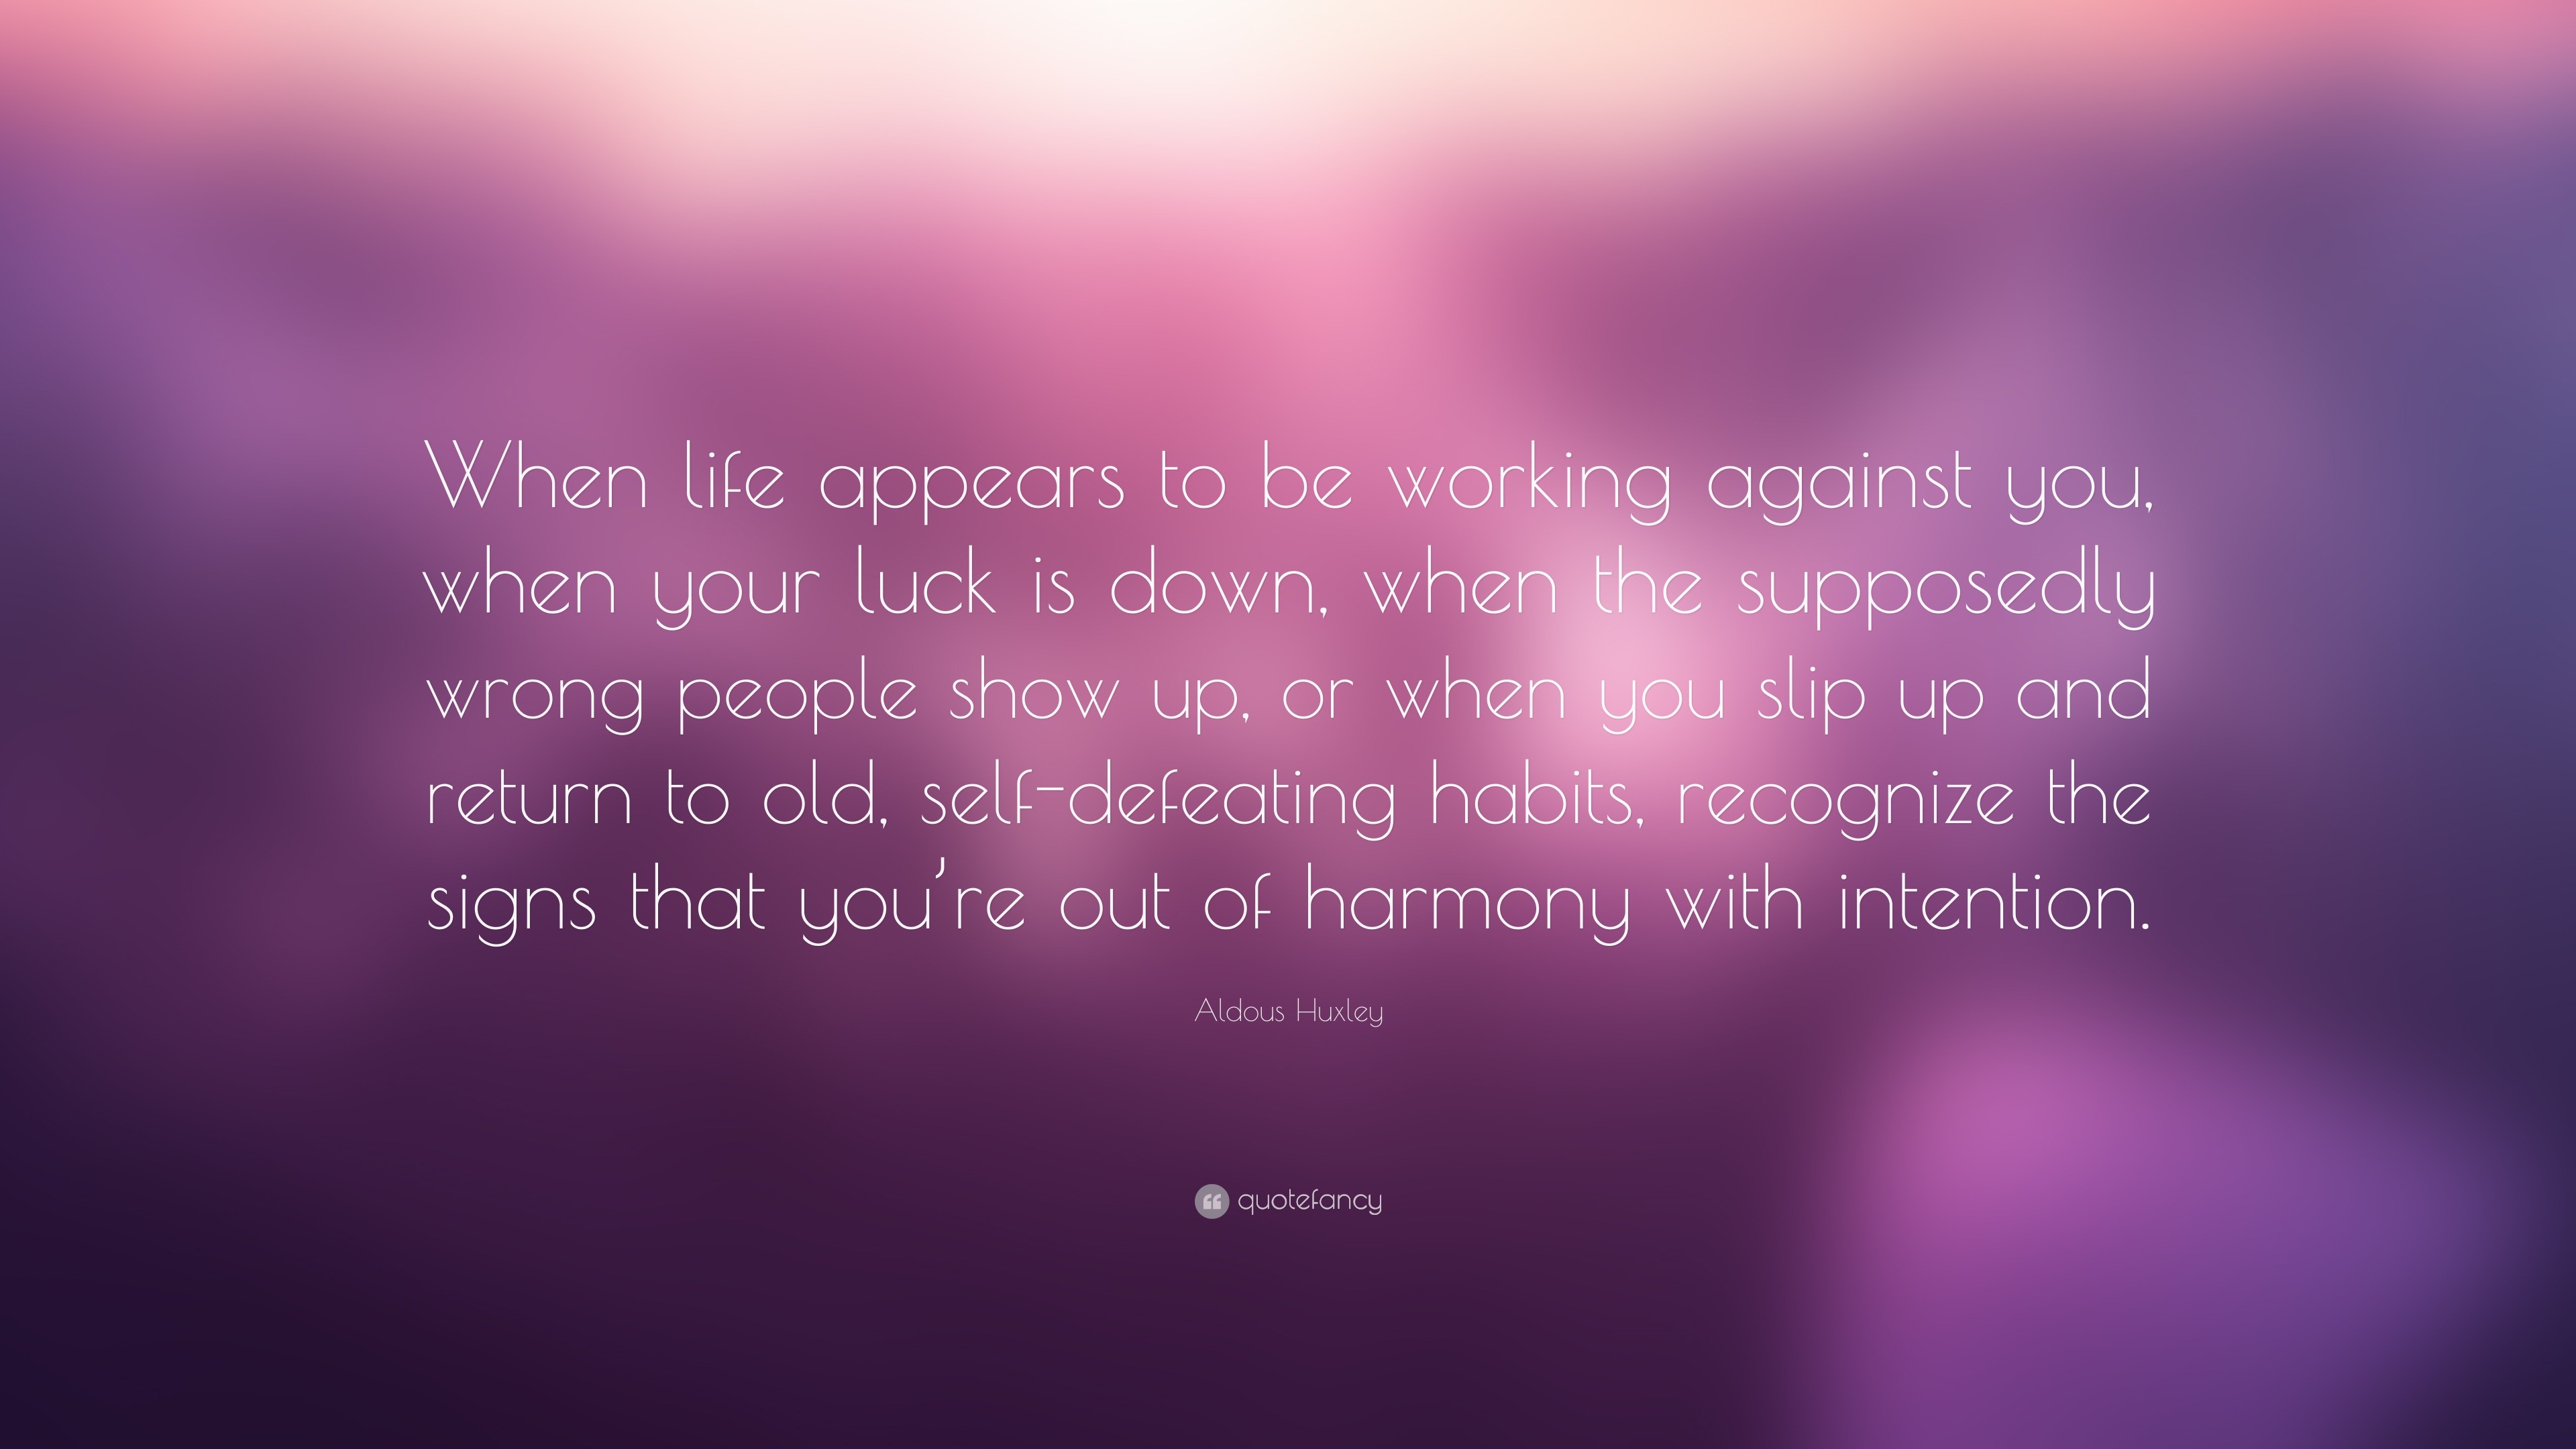 Aldous Huxley Quote: “When life appears to be working against you, when ...